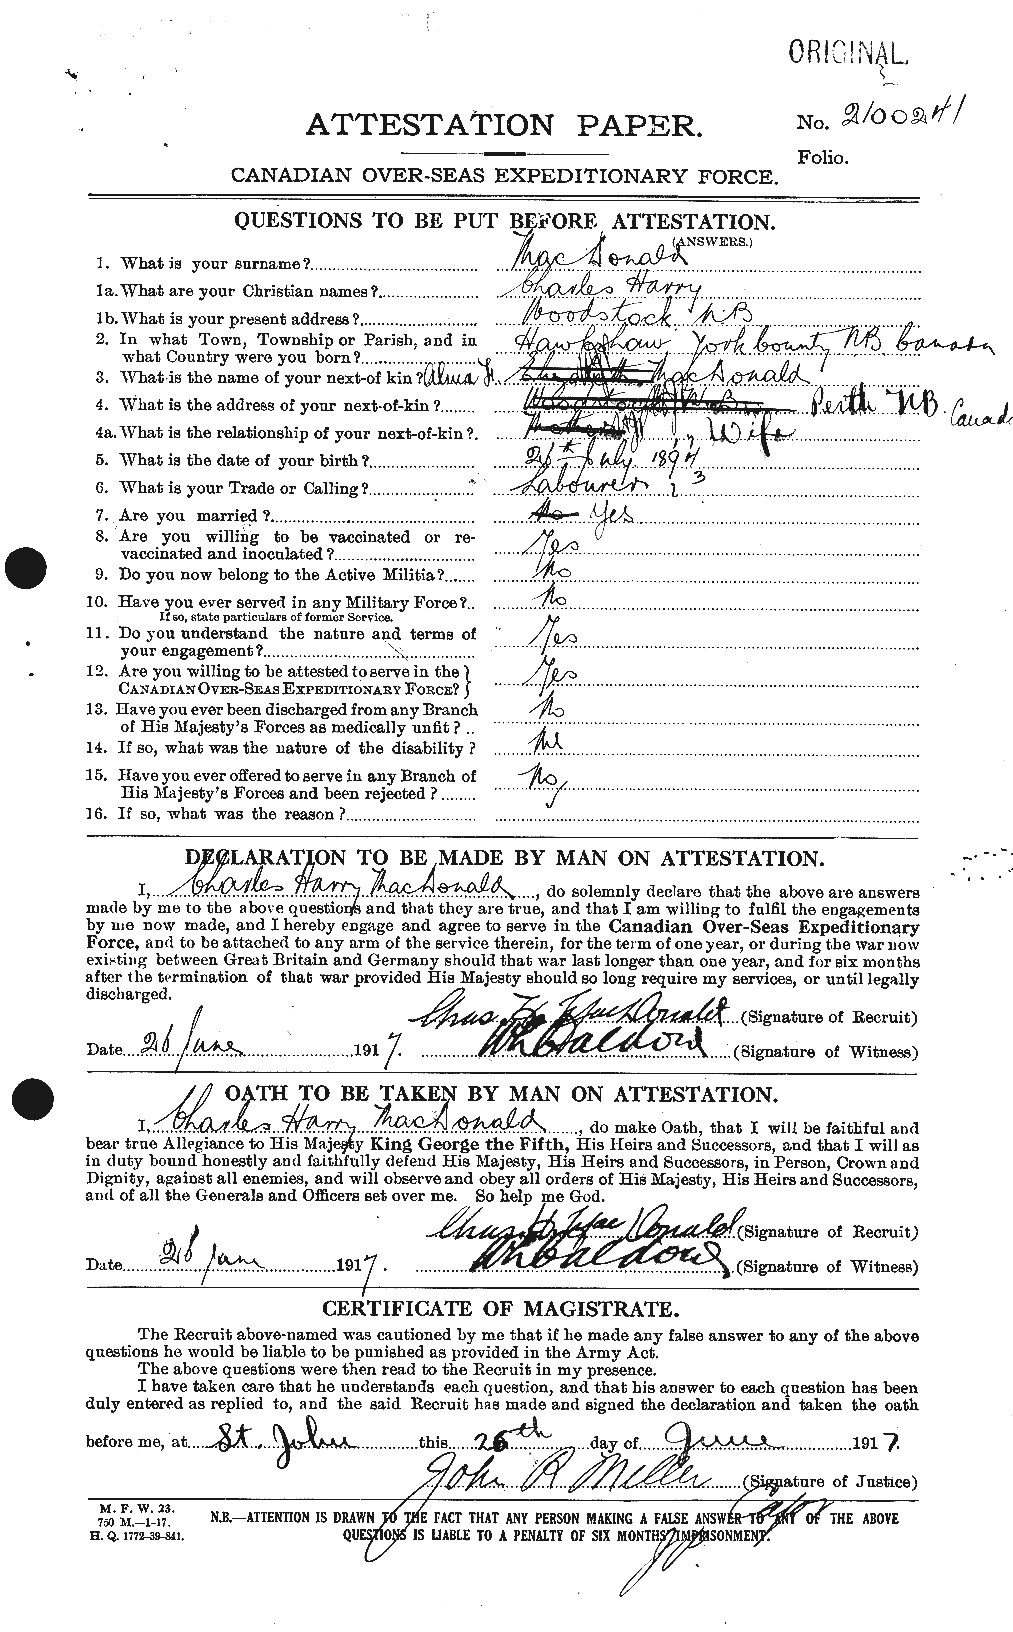 Personnel Records of the First World War - CEF 517406a